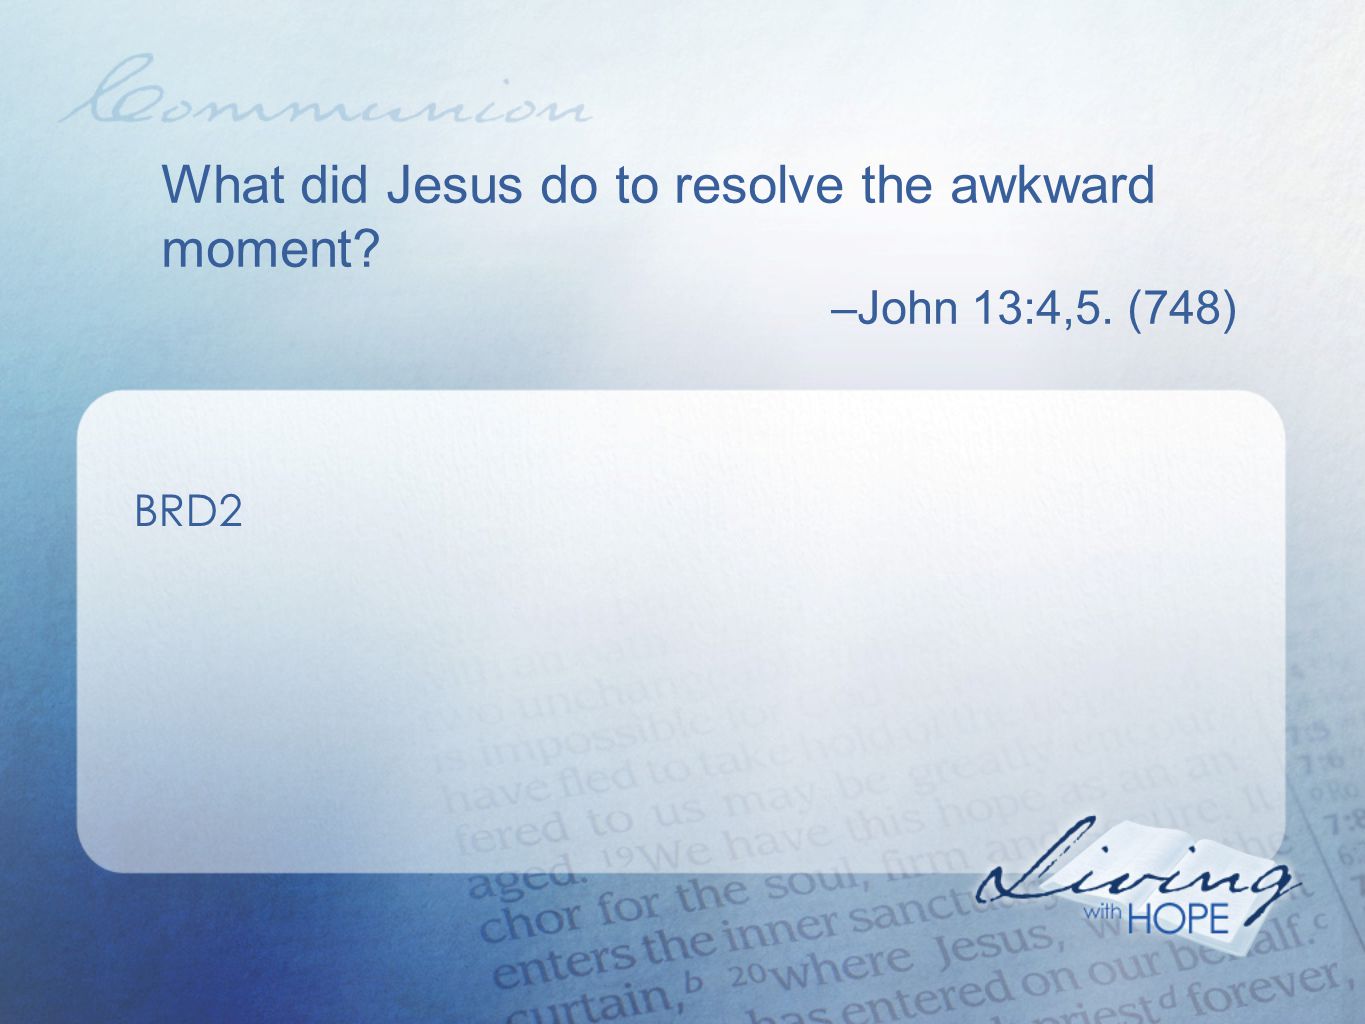 What did Jesus do to resolve the awkward moment